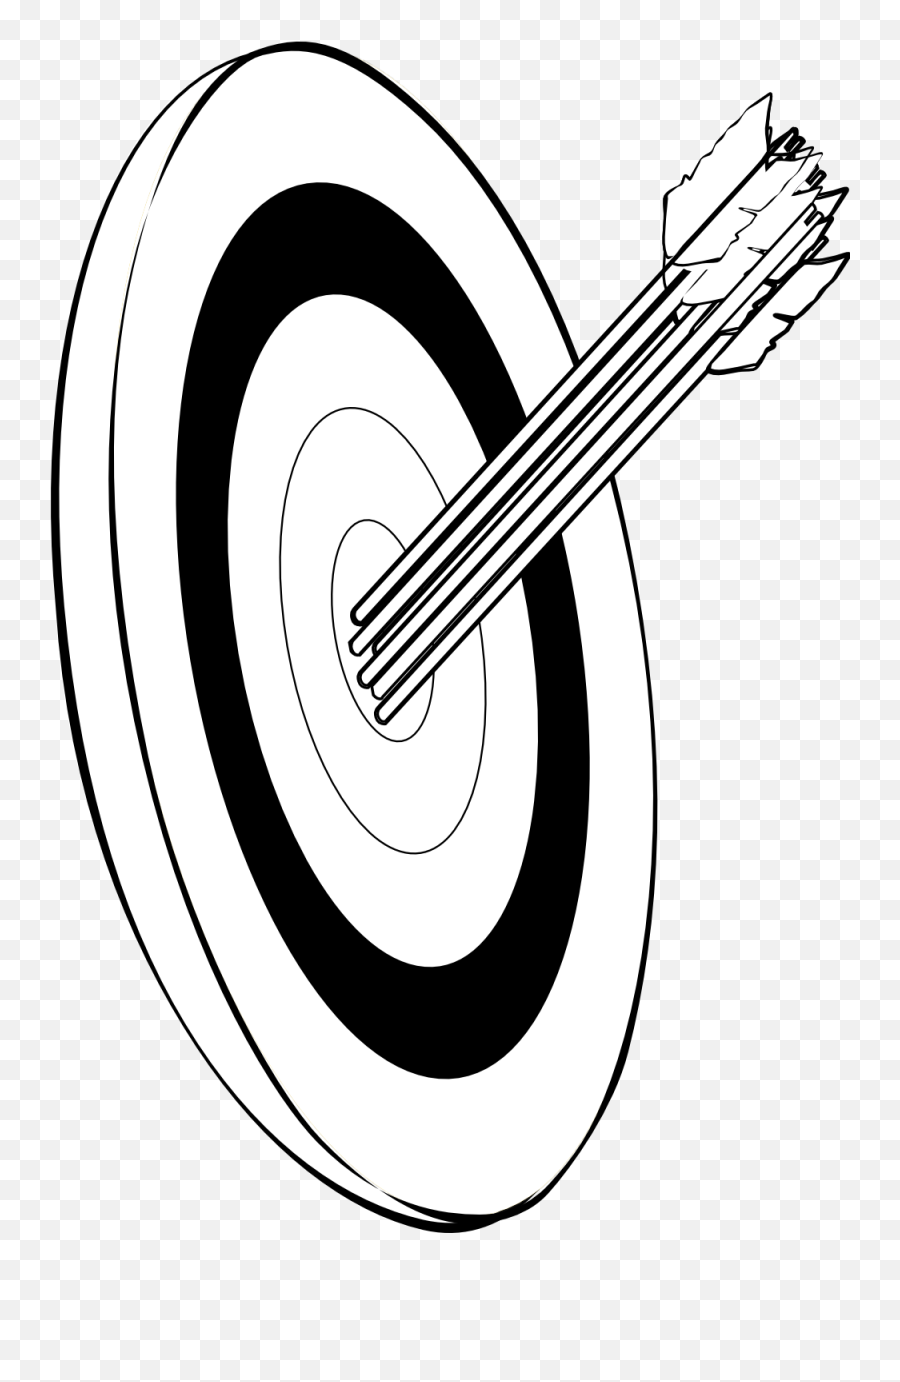 Download Arrows And Target Snarkhunter Arrows In The Gold - Black And White Archery Clip Art Emoji,Arrow Clipart Black And White